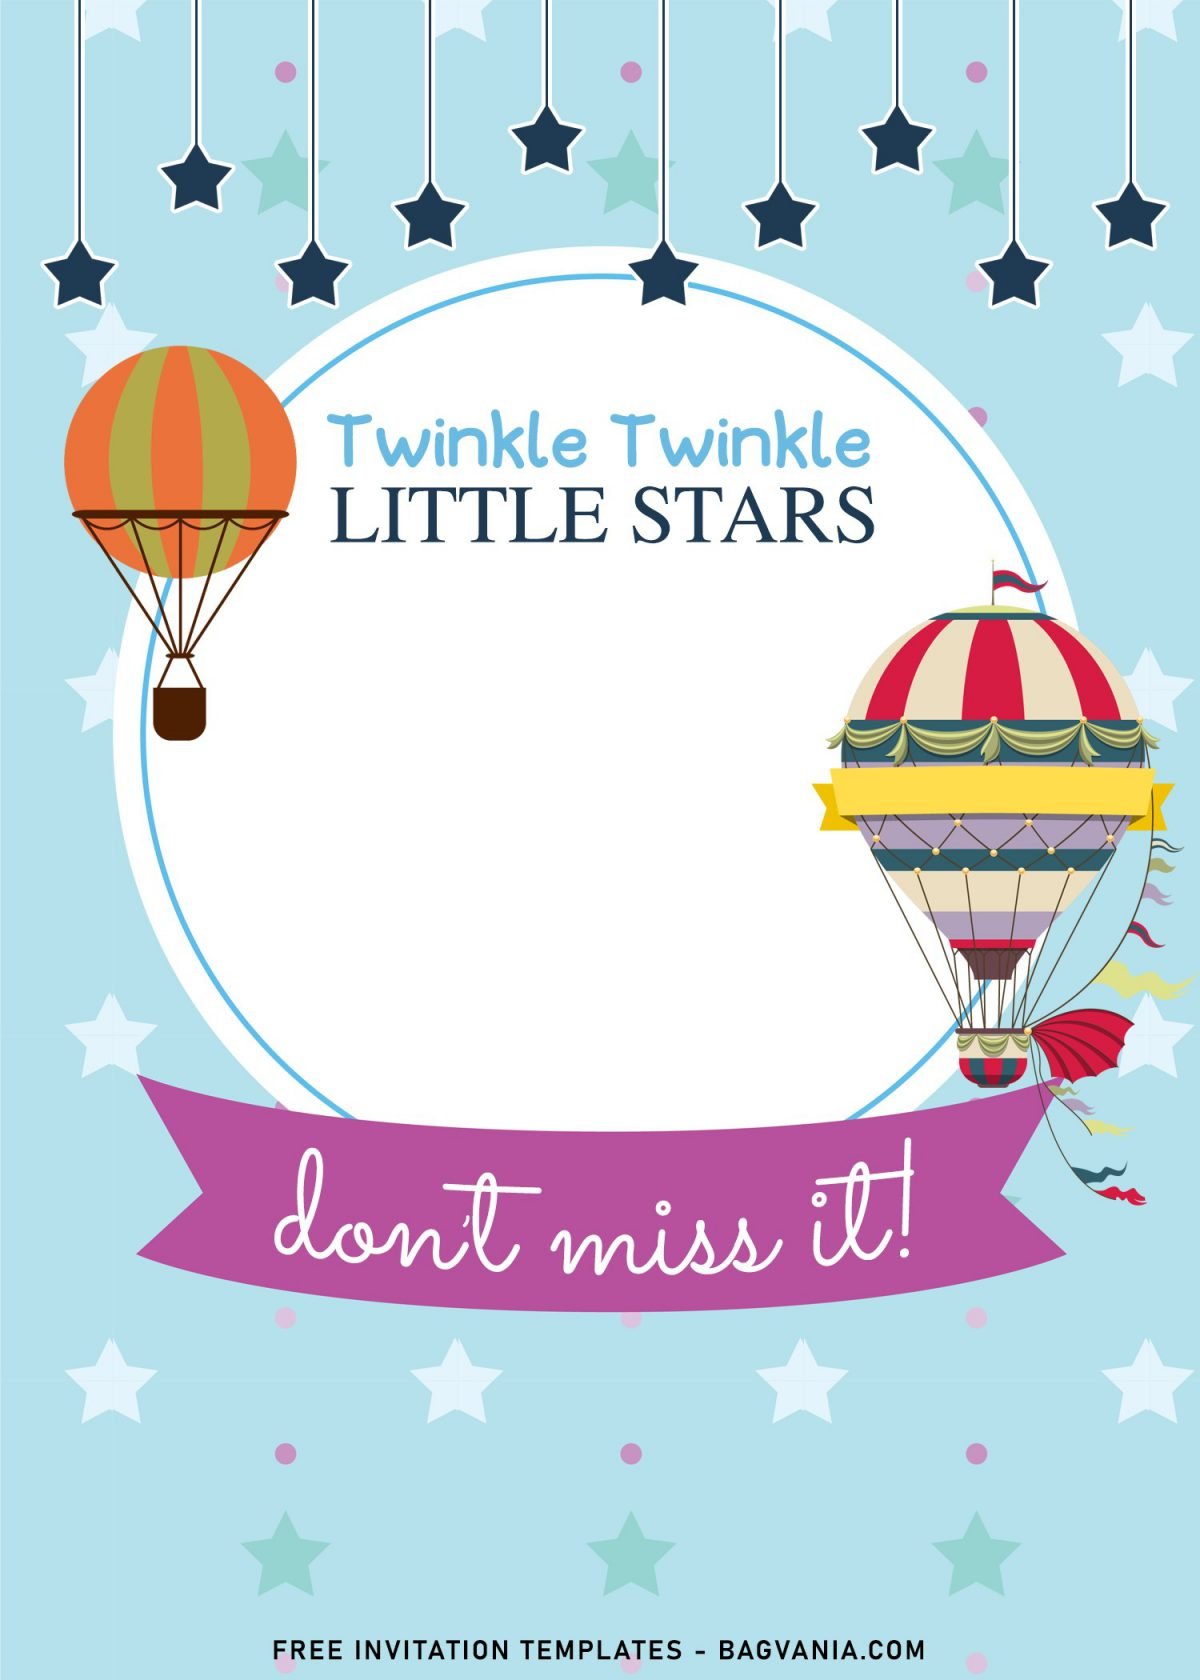 7+ Twinkle Twinkle Little Stars Birthday Invitation Templates For Any Ages and has Hot air balloon